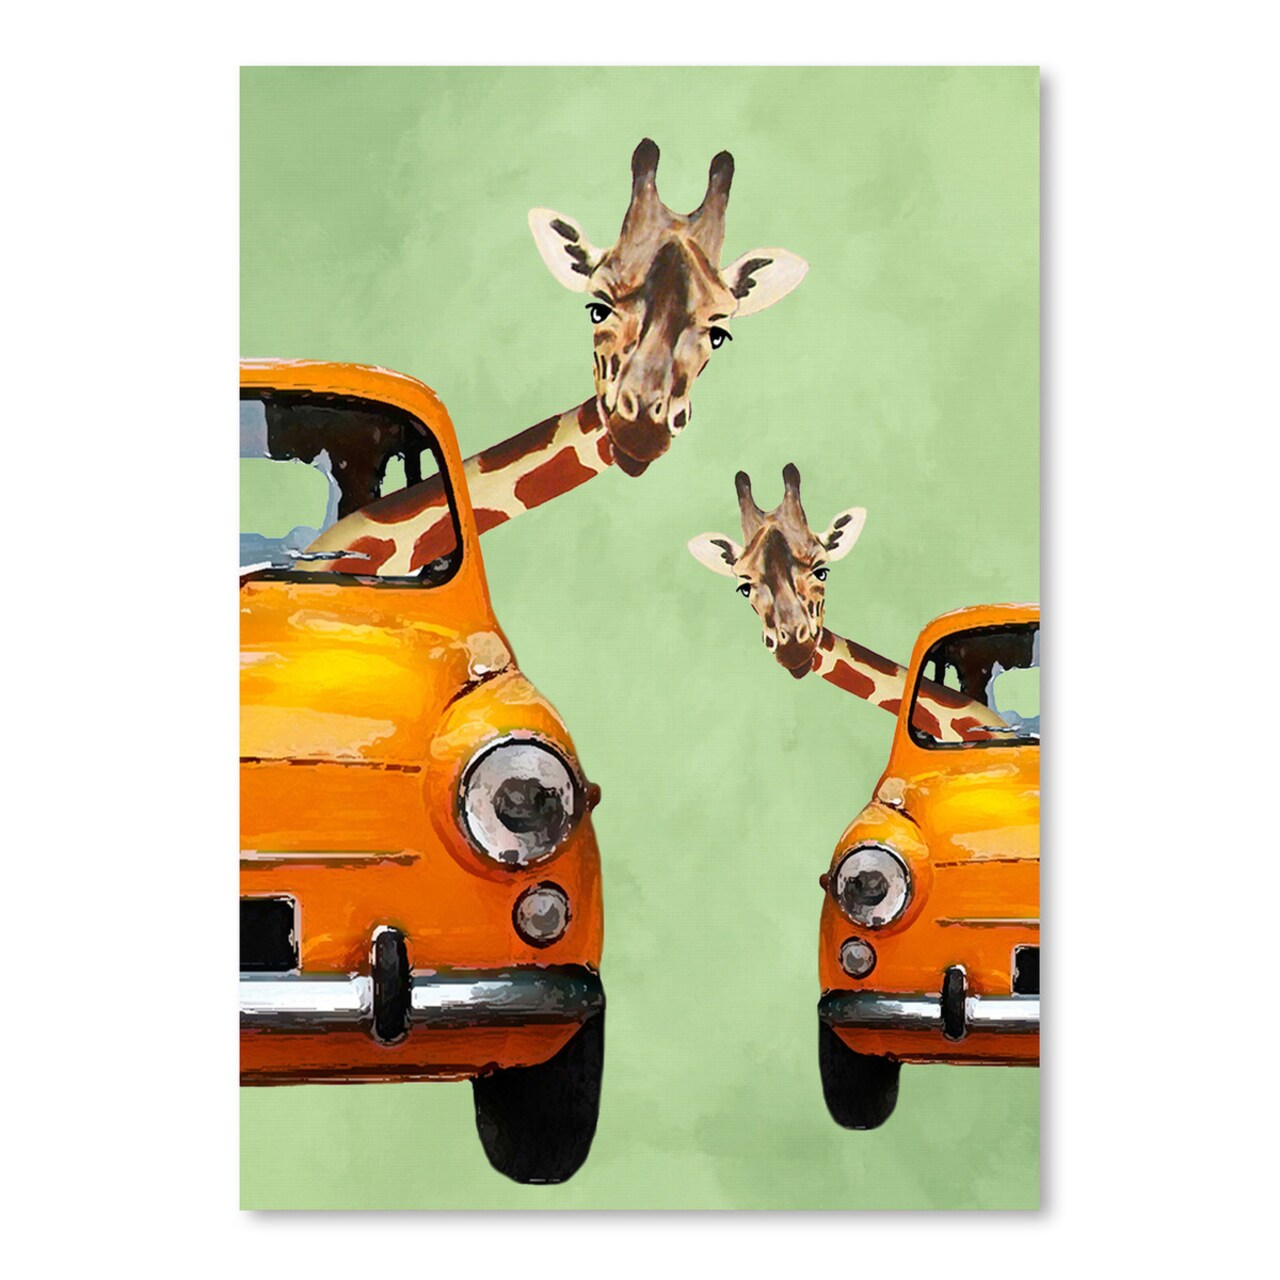 Giraffes In Yellow Cars by Coco De Paris  Poster Art Print - Americanflat